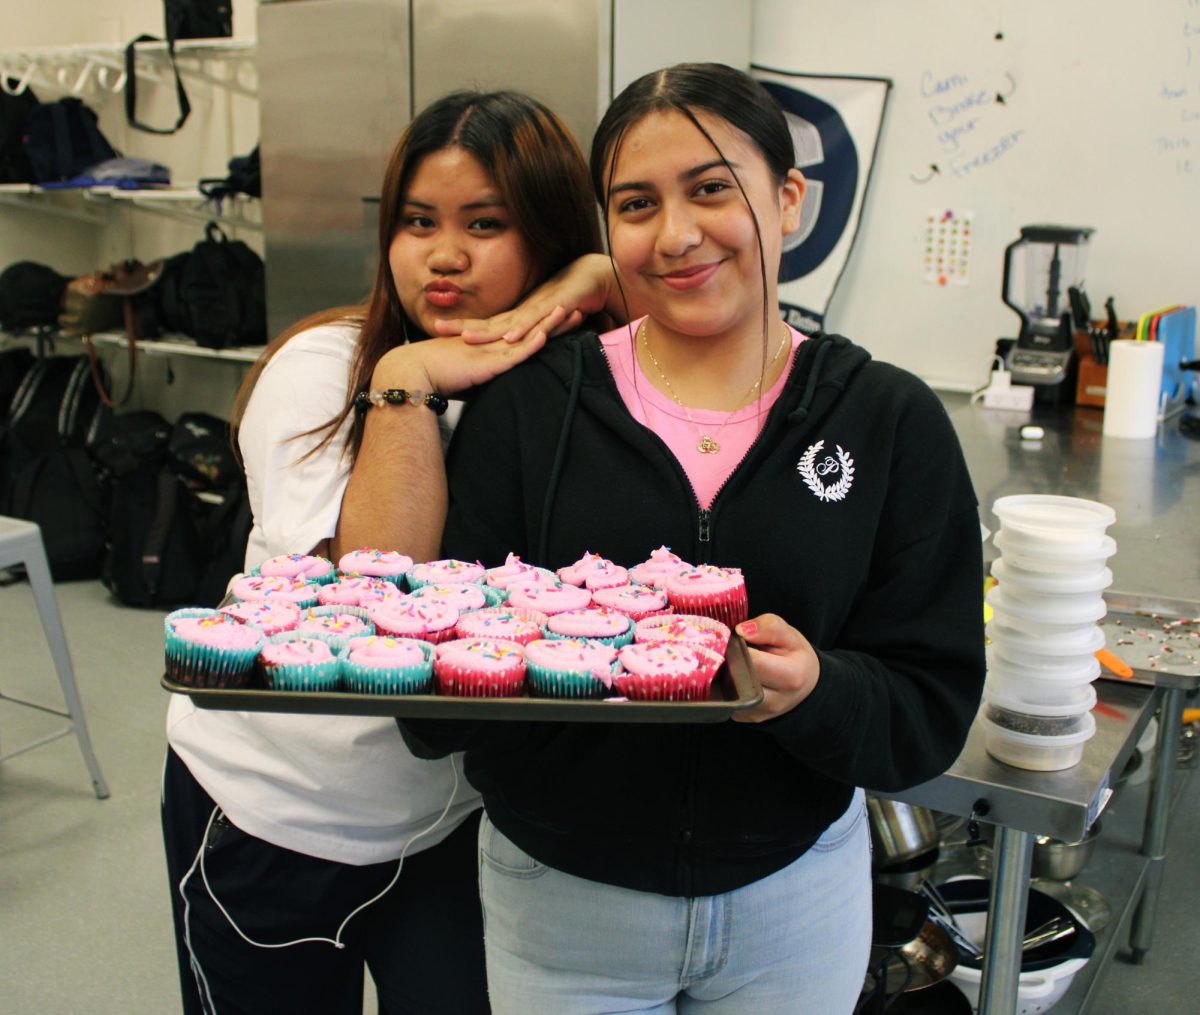 Students finish preparing their cupcakes.